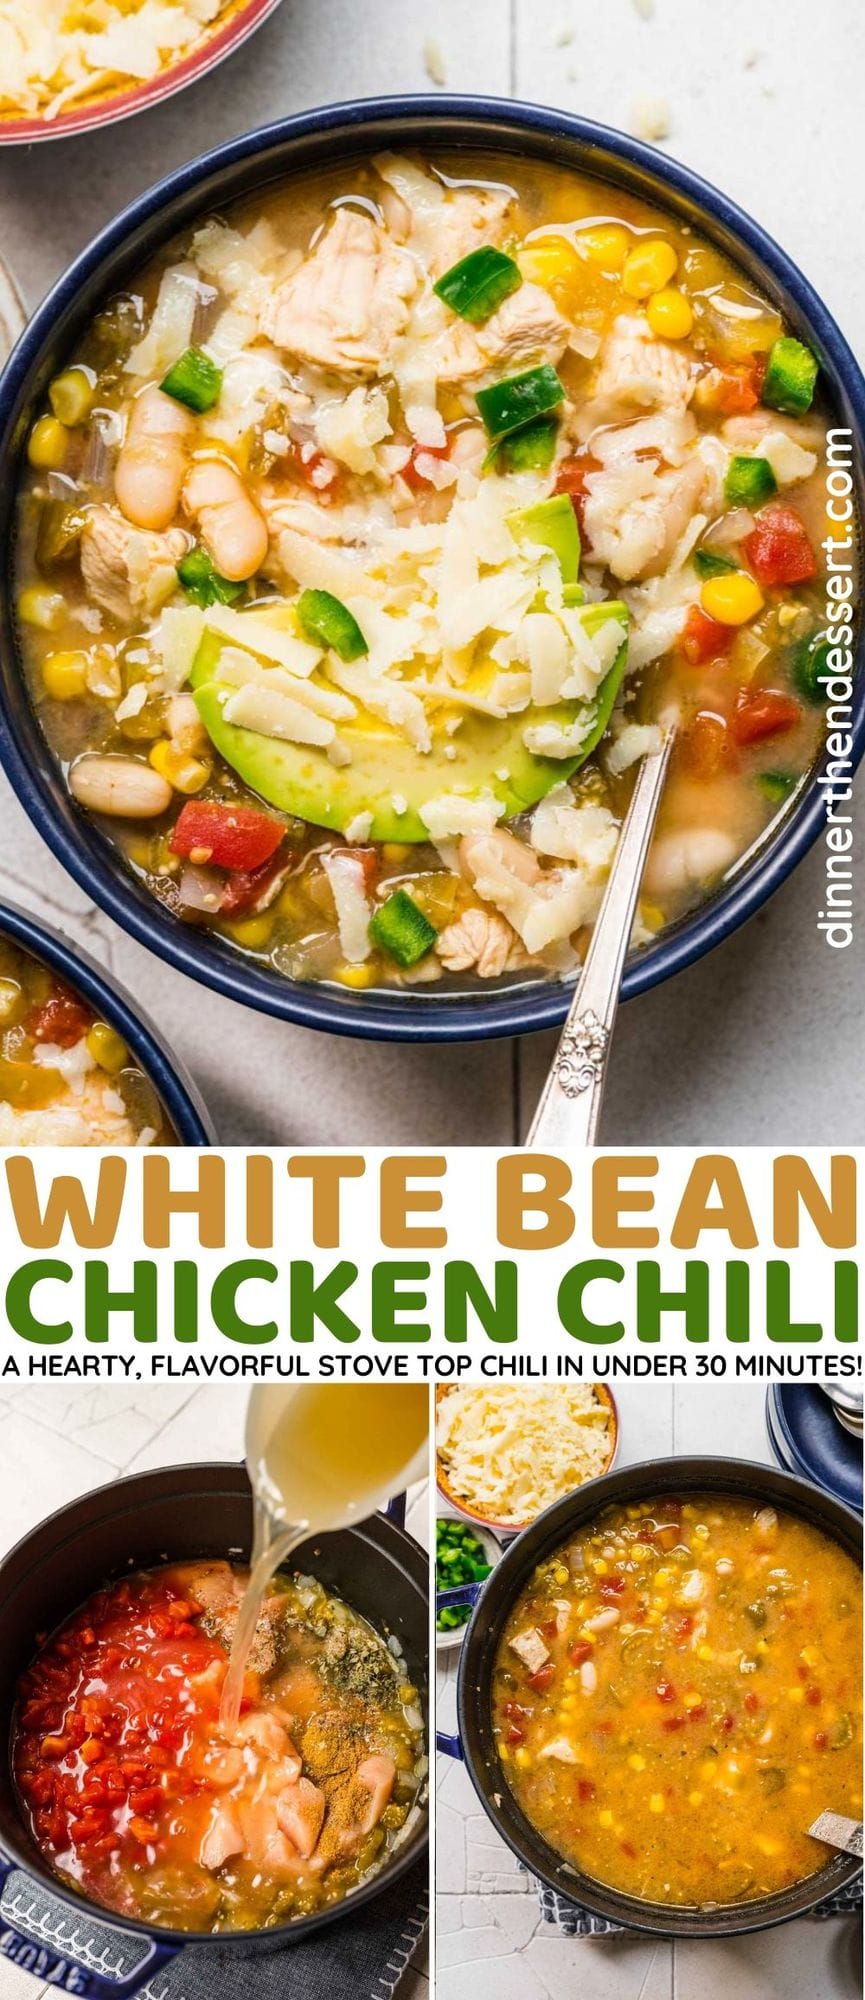 White Bean Chicken Chili in pan and bowl collage